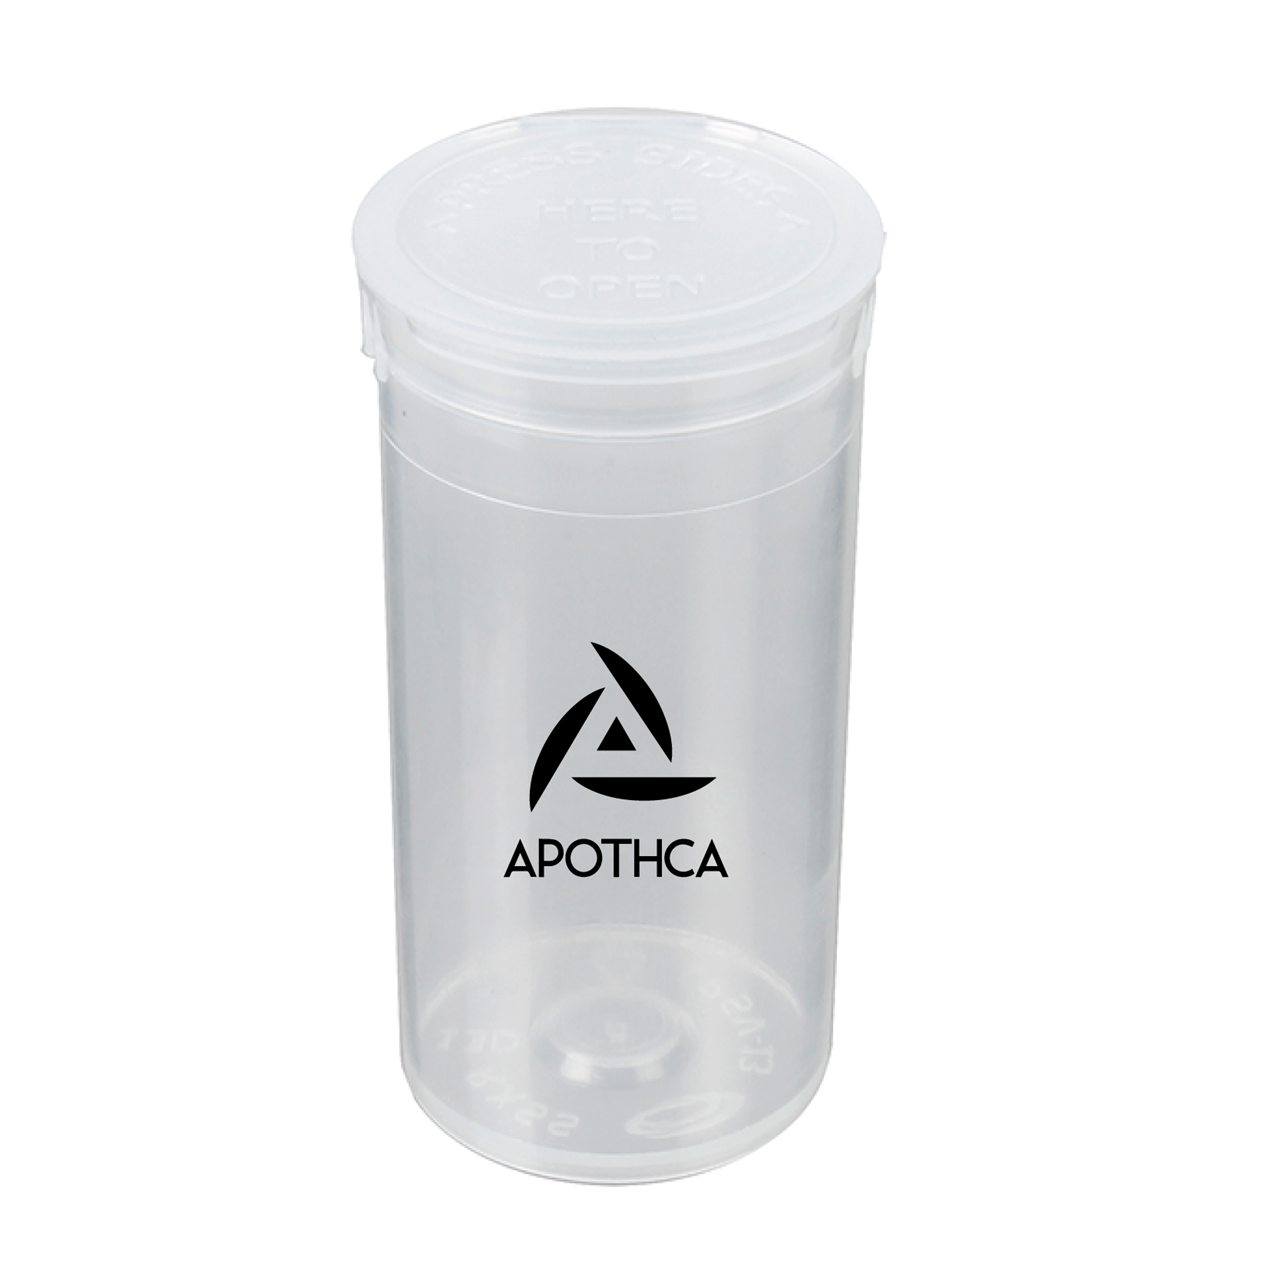 Pop Top Containers: Pop Top Bottles For Cannabis Suppliers